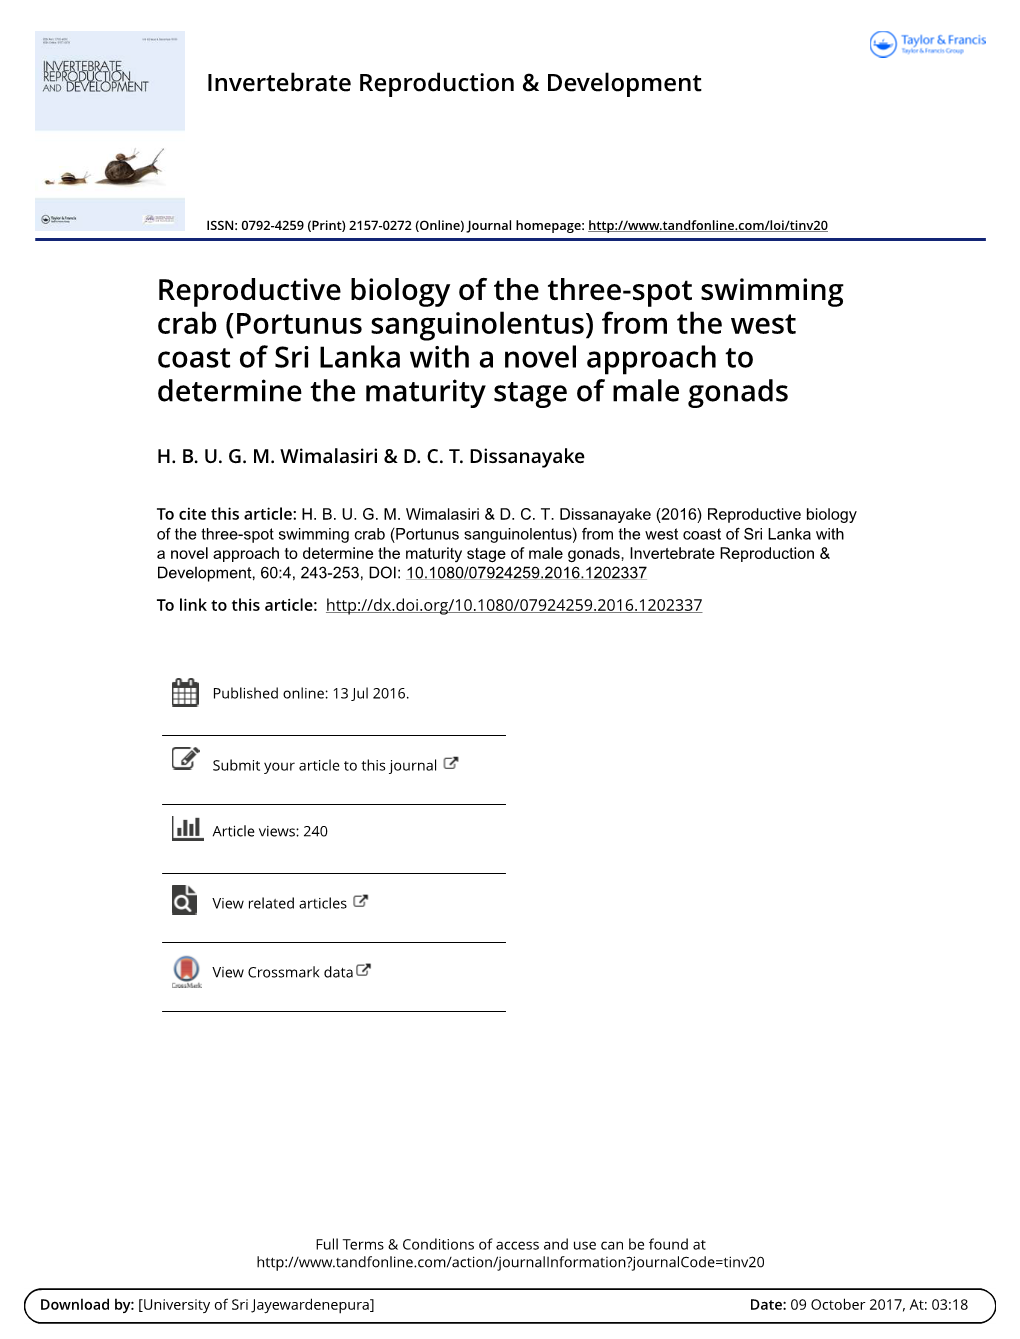 Reproductive Biology of the Three-Spot Swimming Crab (Portunus Sanguinolentus) from the West Coast of Sri Lanka with a Novel